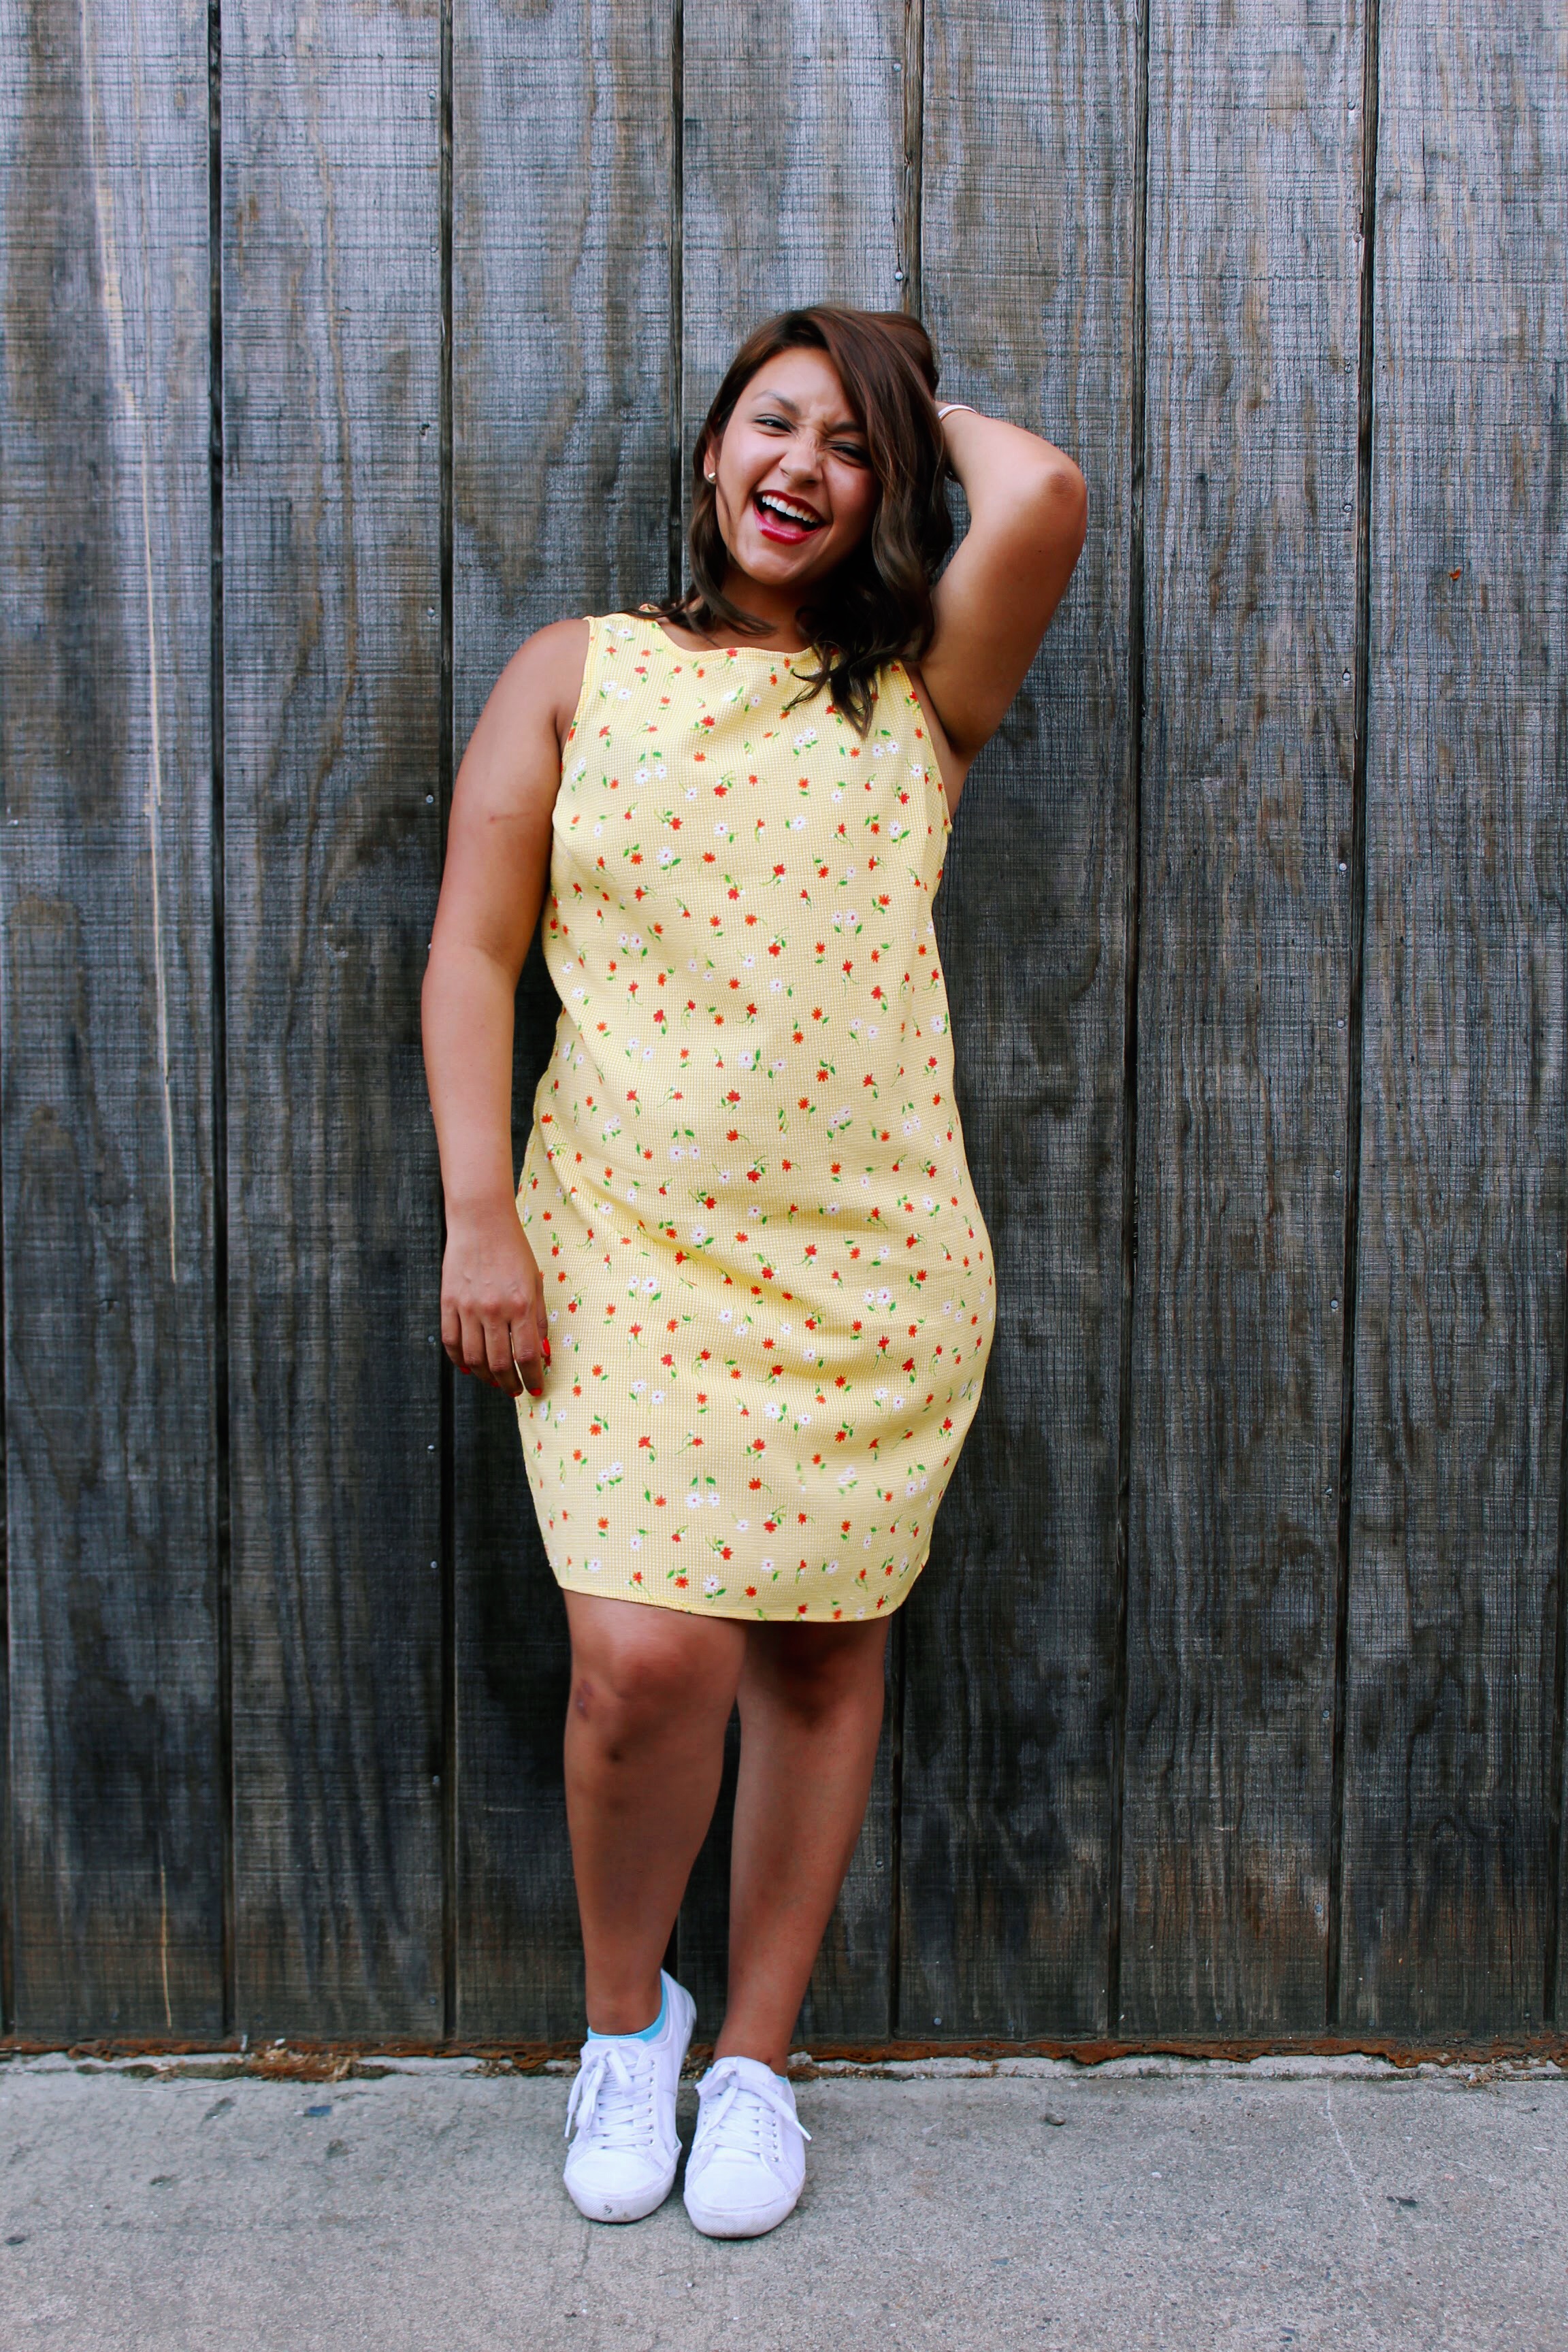 Sleeveless Yellow Floral Dress and White Sneakers 